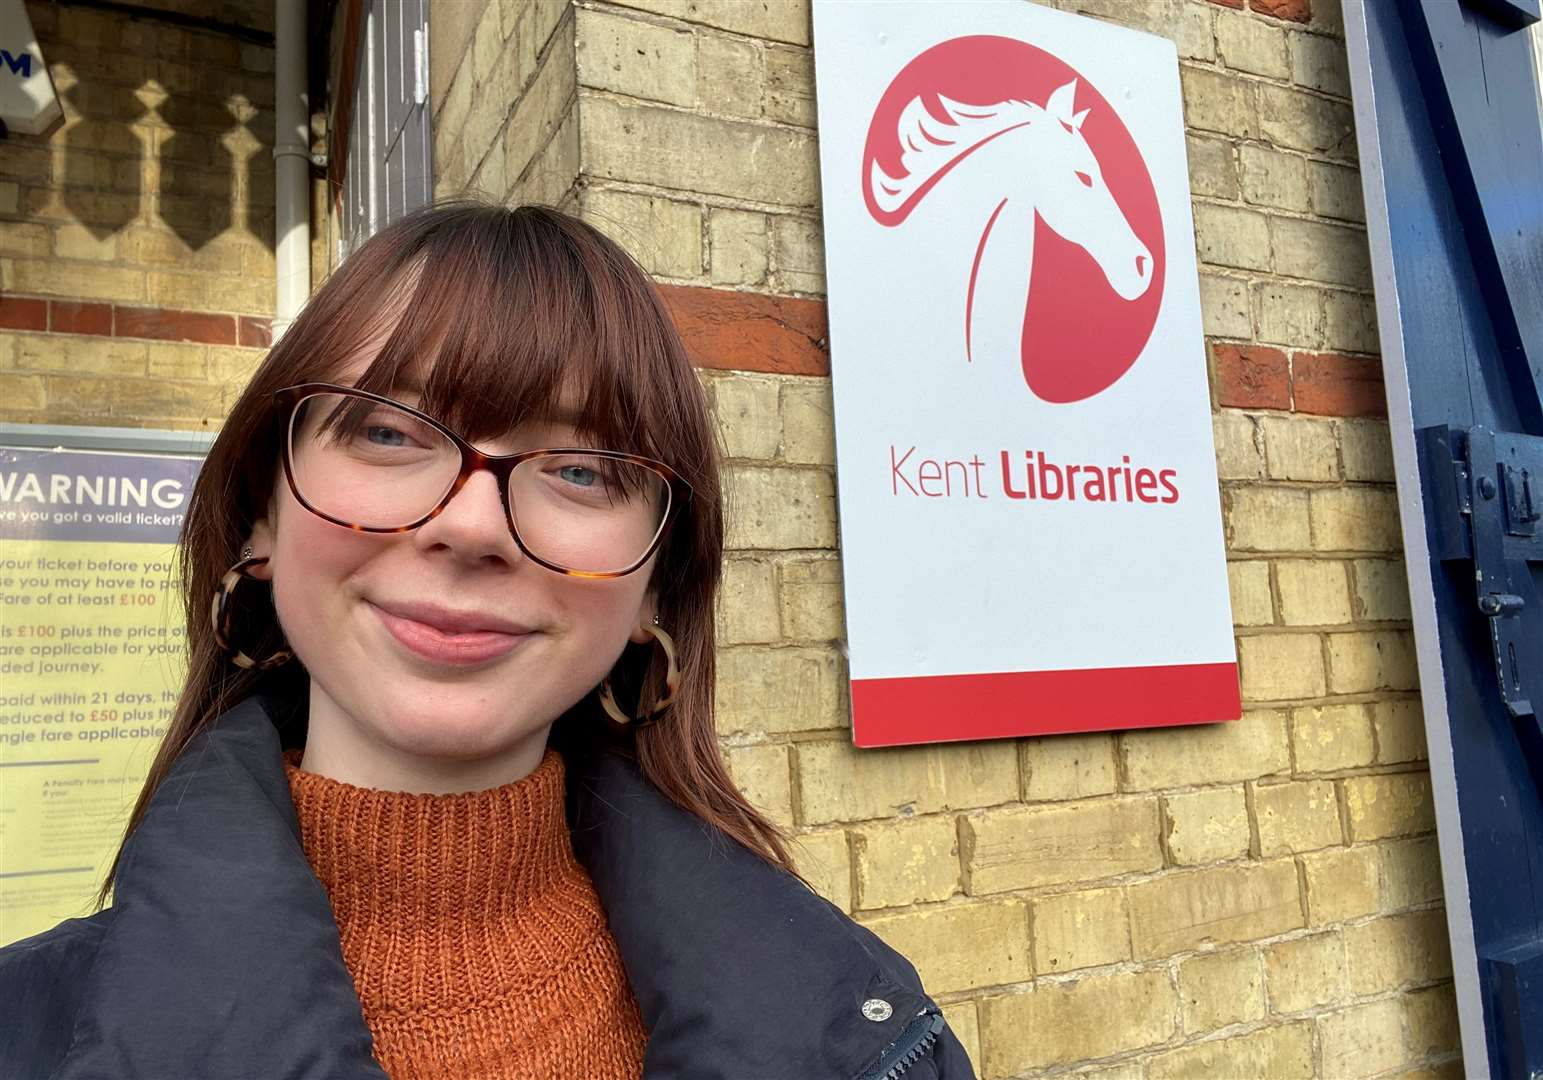 Reporter Cara Simmonds visited two of Kent's libraries